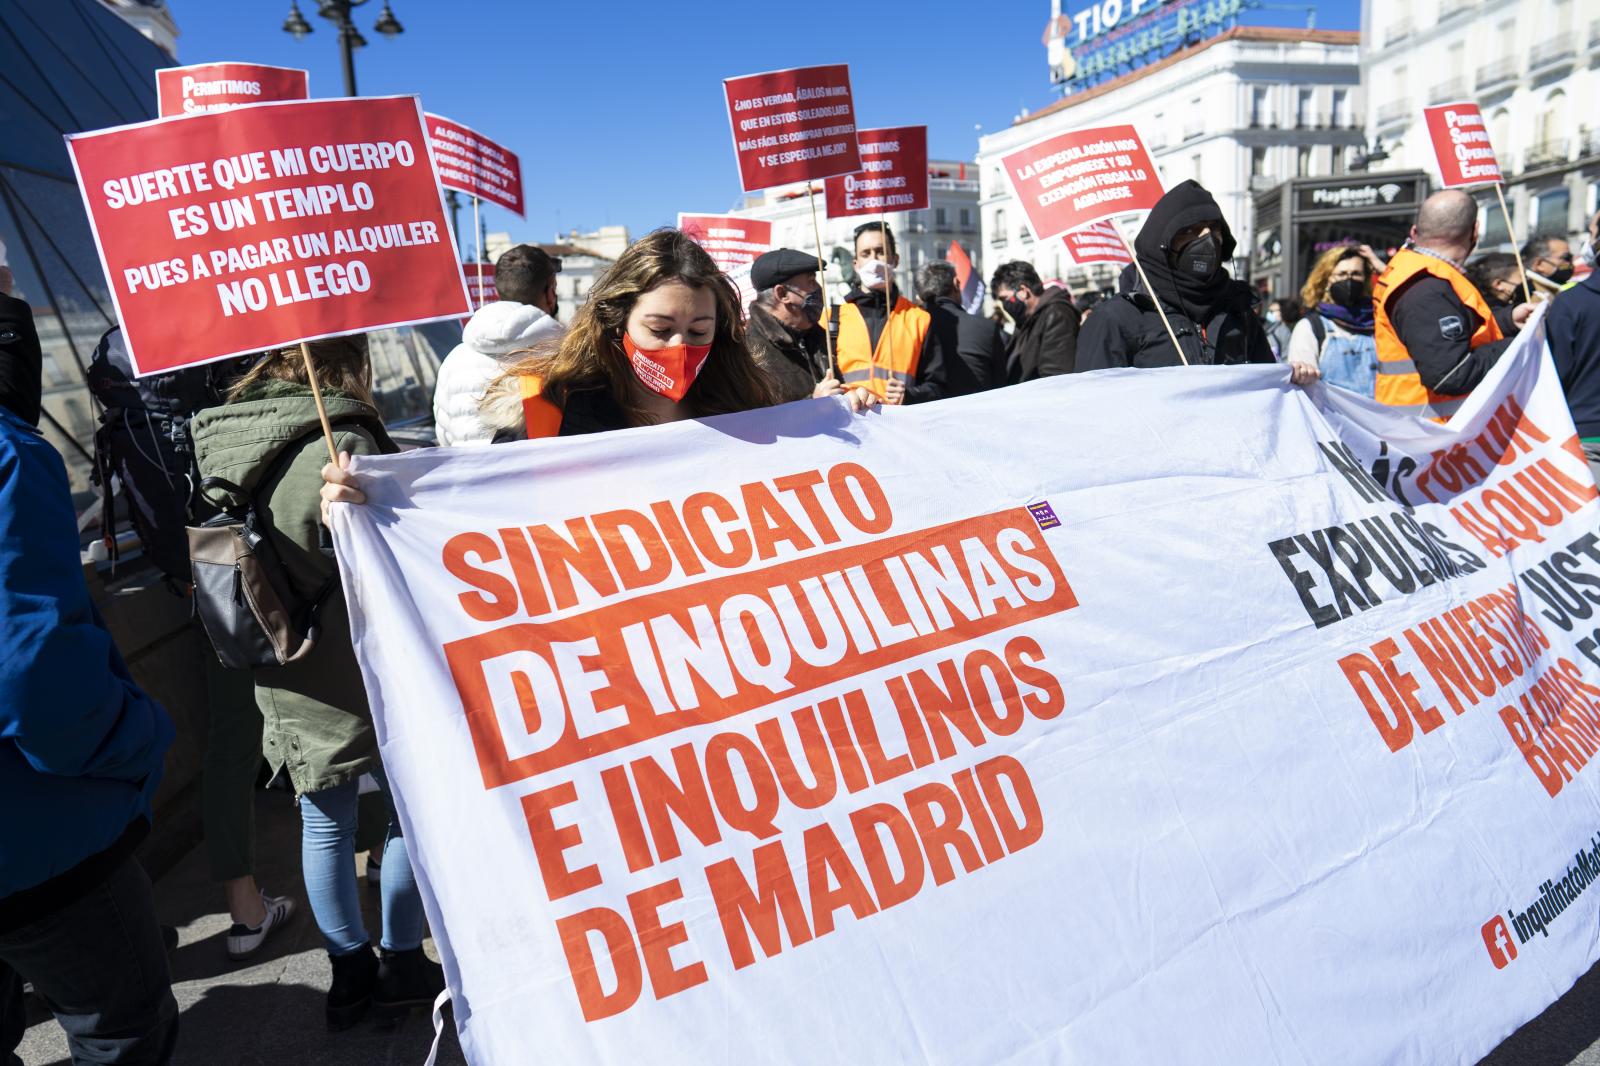 Overview - Demonstration in Madrid organized by Tenant's Union...